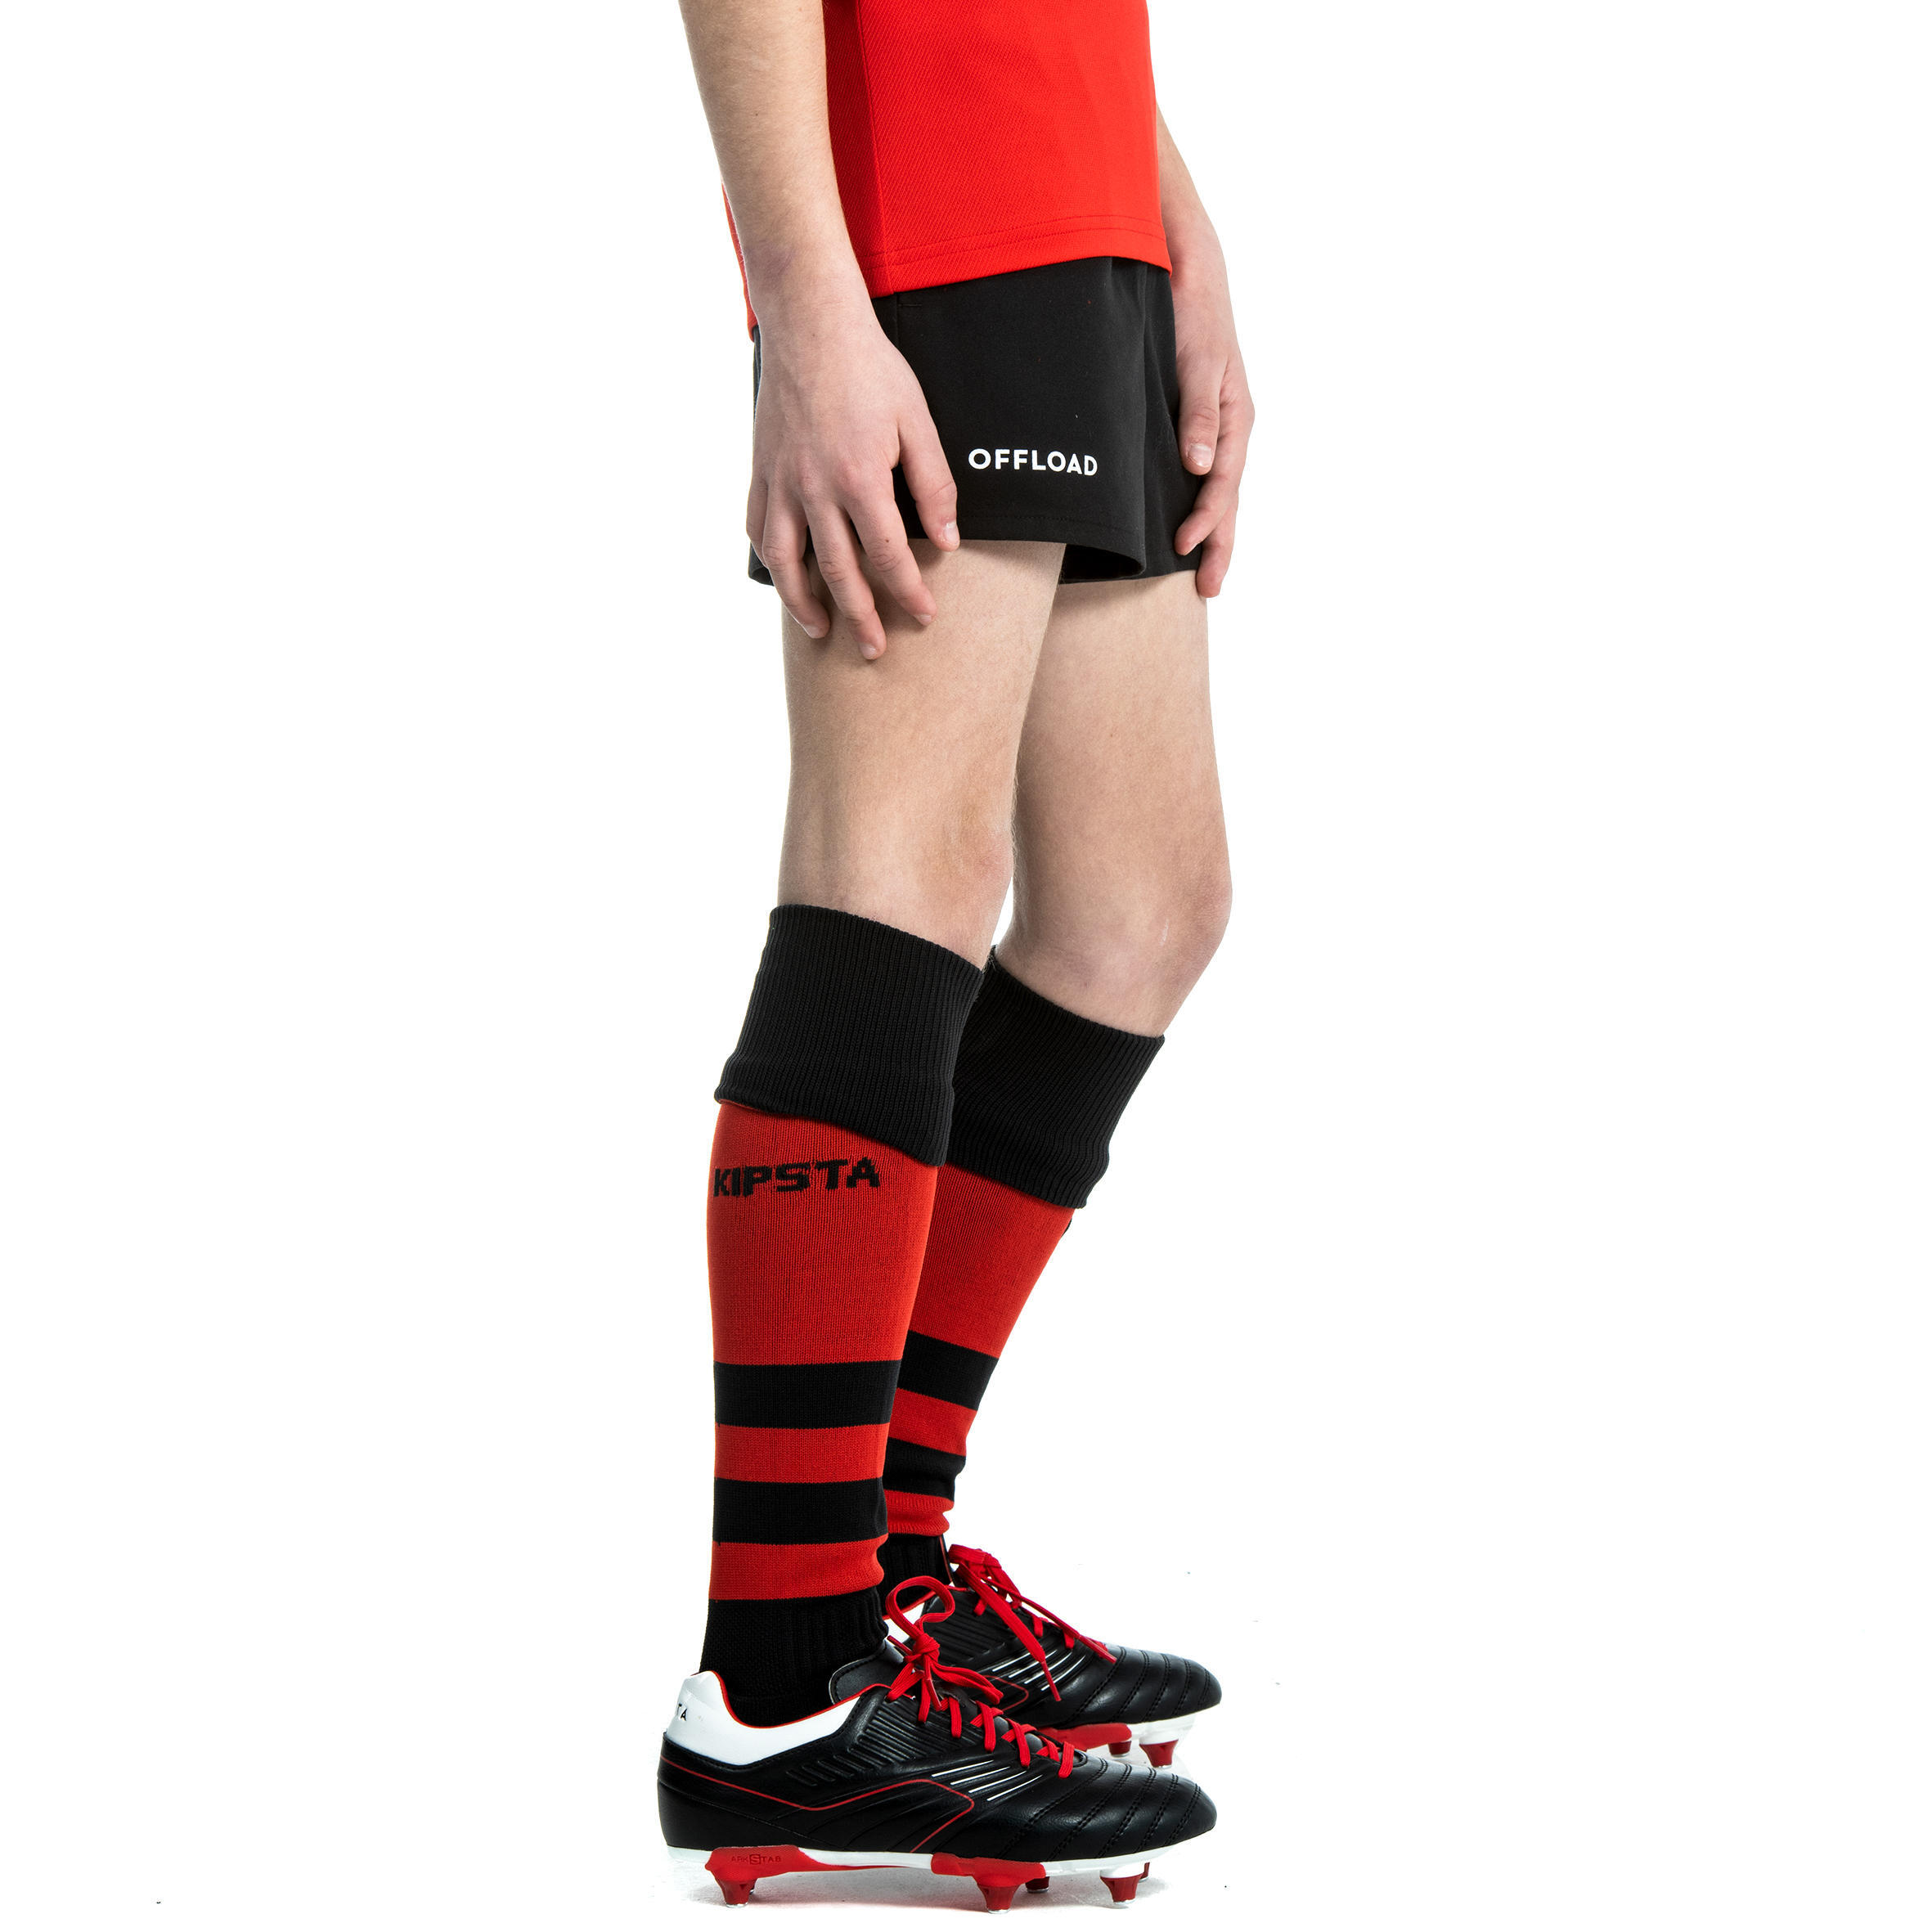 Refurbished Kids Rugby Shorts with Pockets R100 - A Grade 6/7